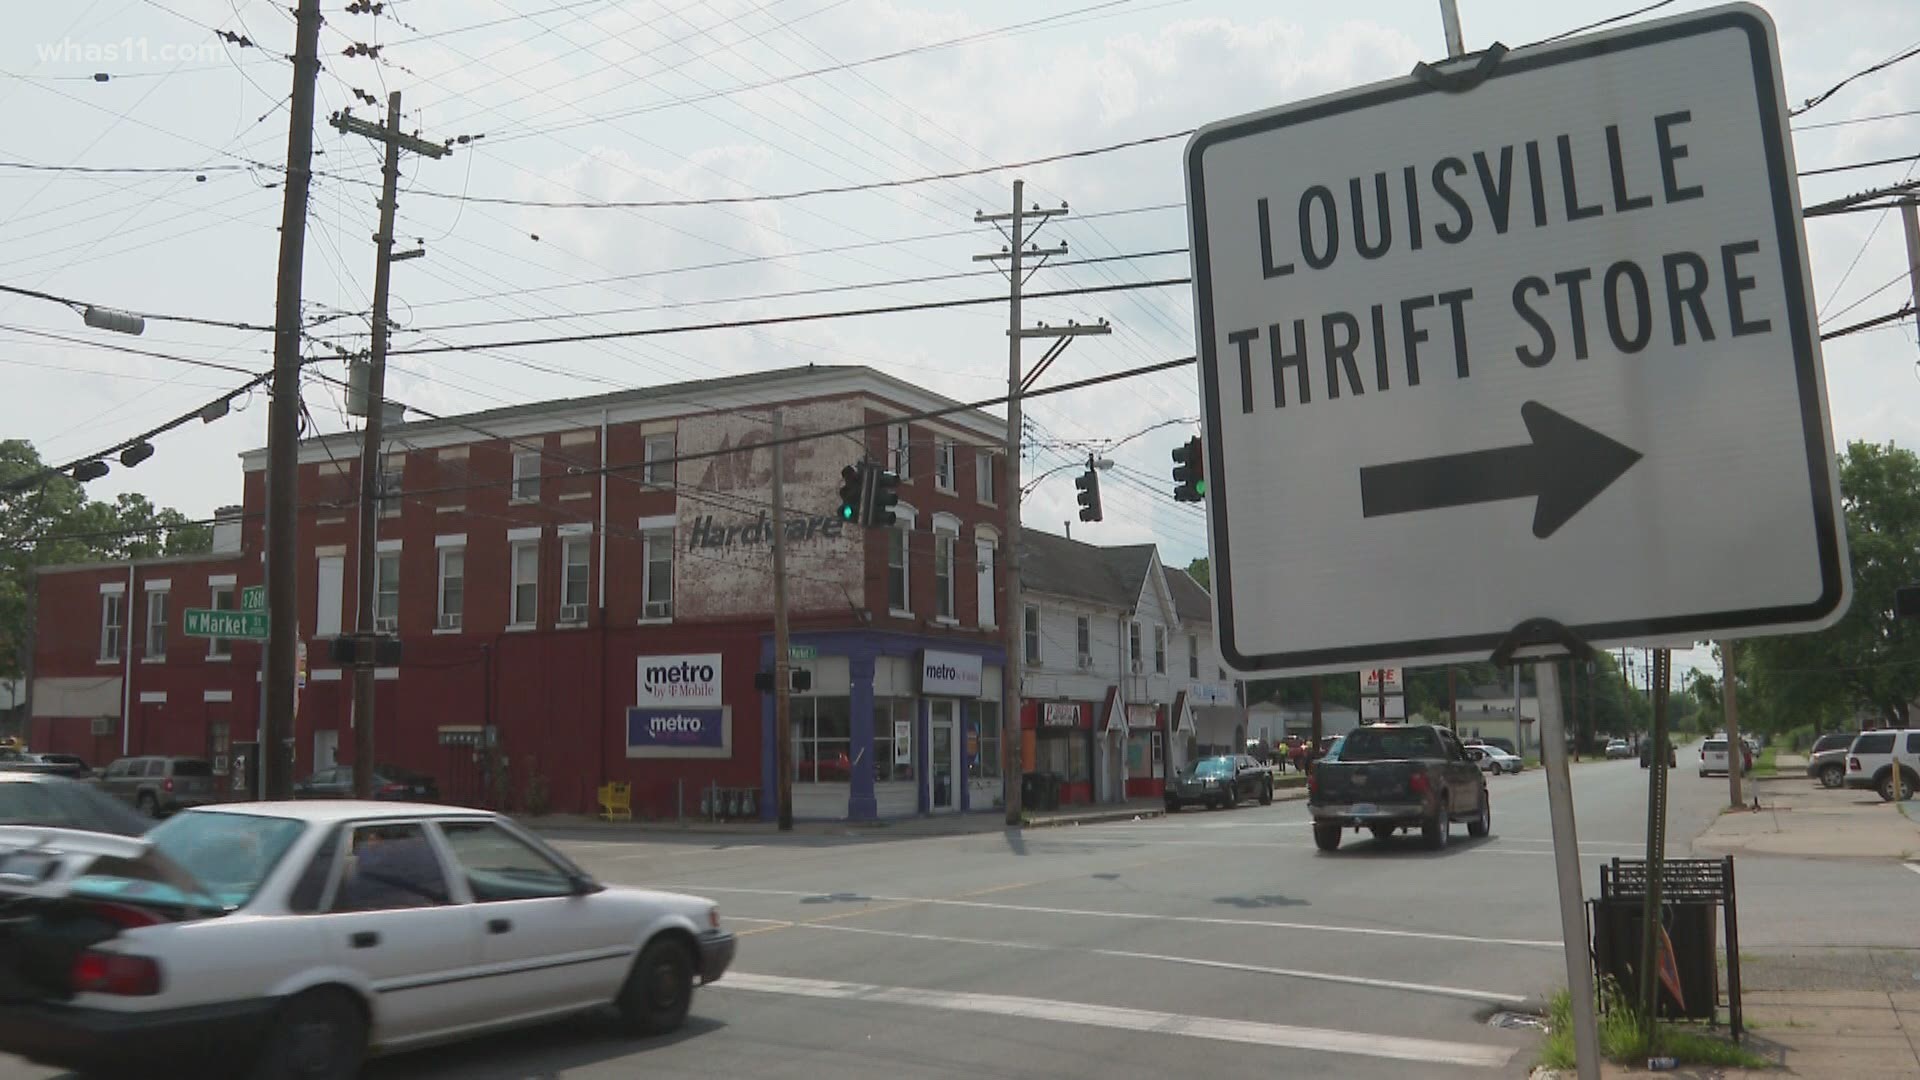 Louisville's Metropolitan Sewer District is working on an emergency sewer repair project outside the Louisville Thrift Store at 26th and Main to fix a pipe.